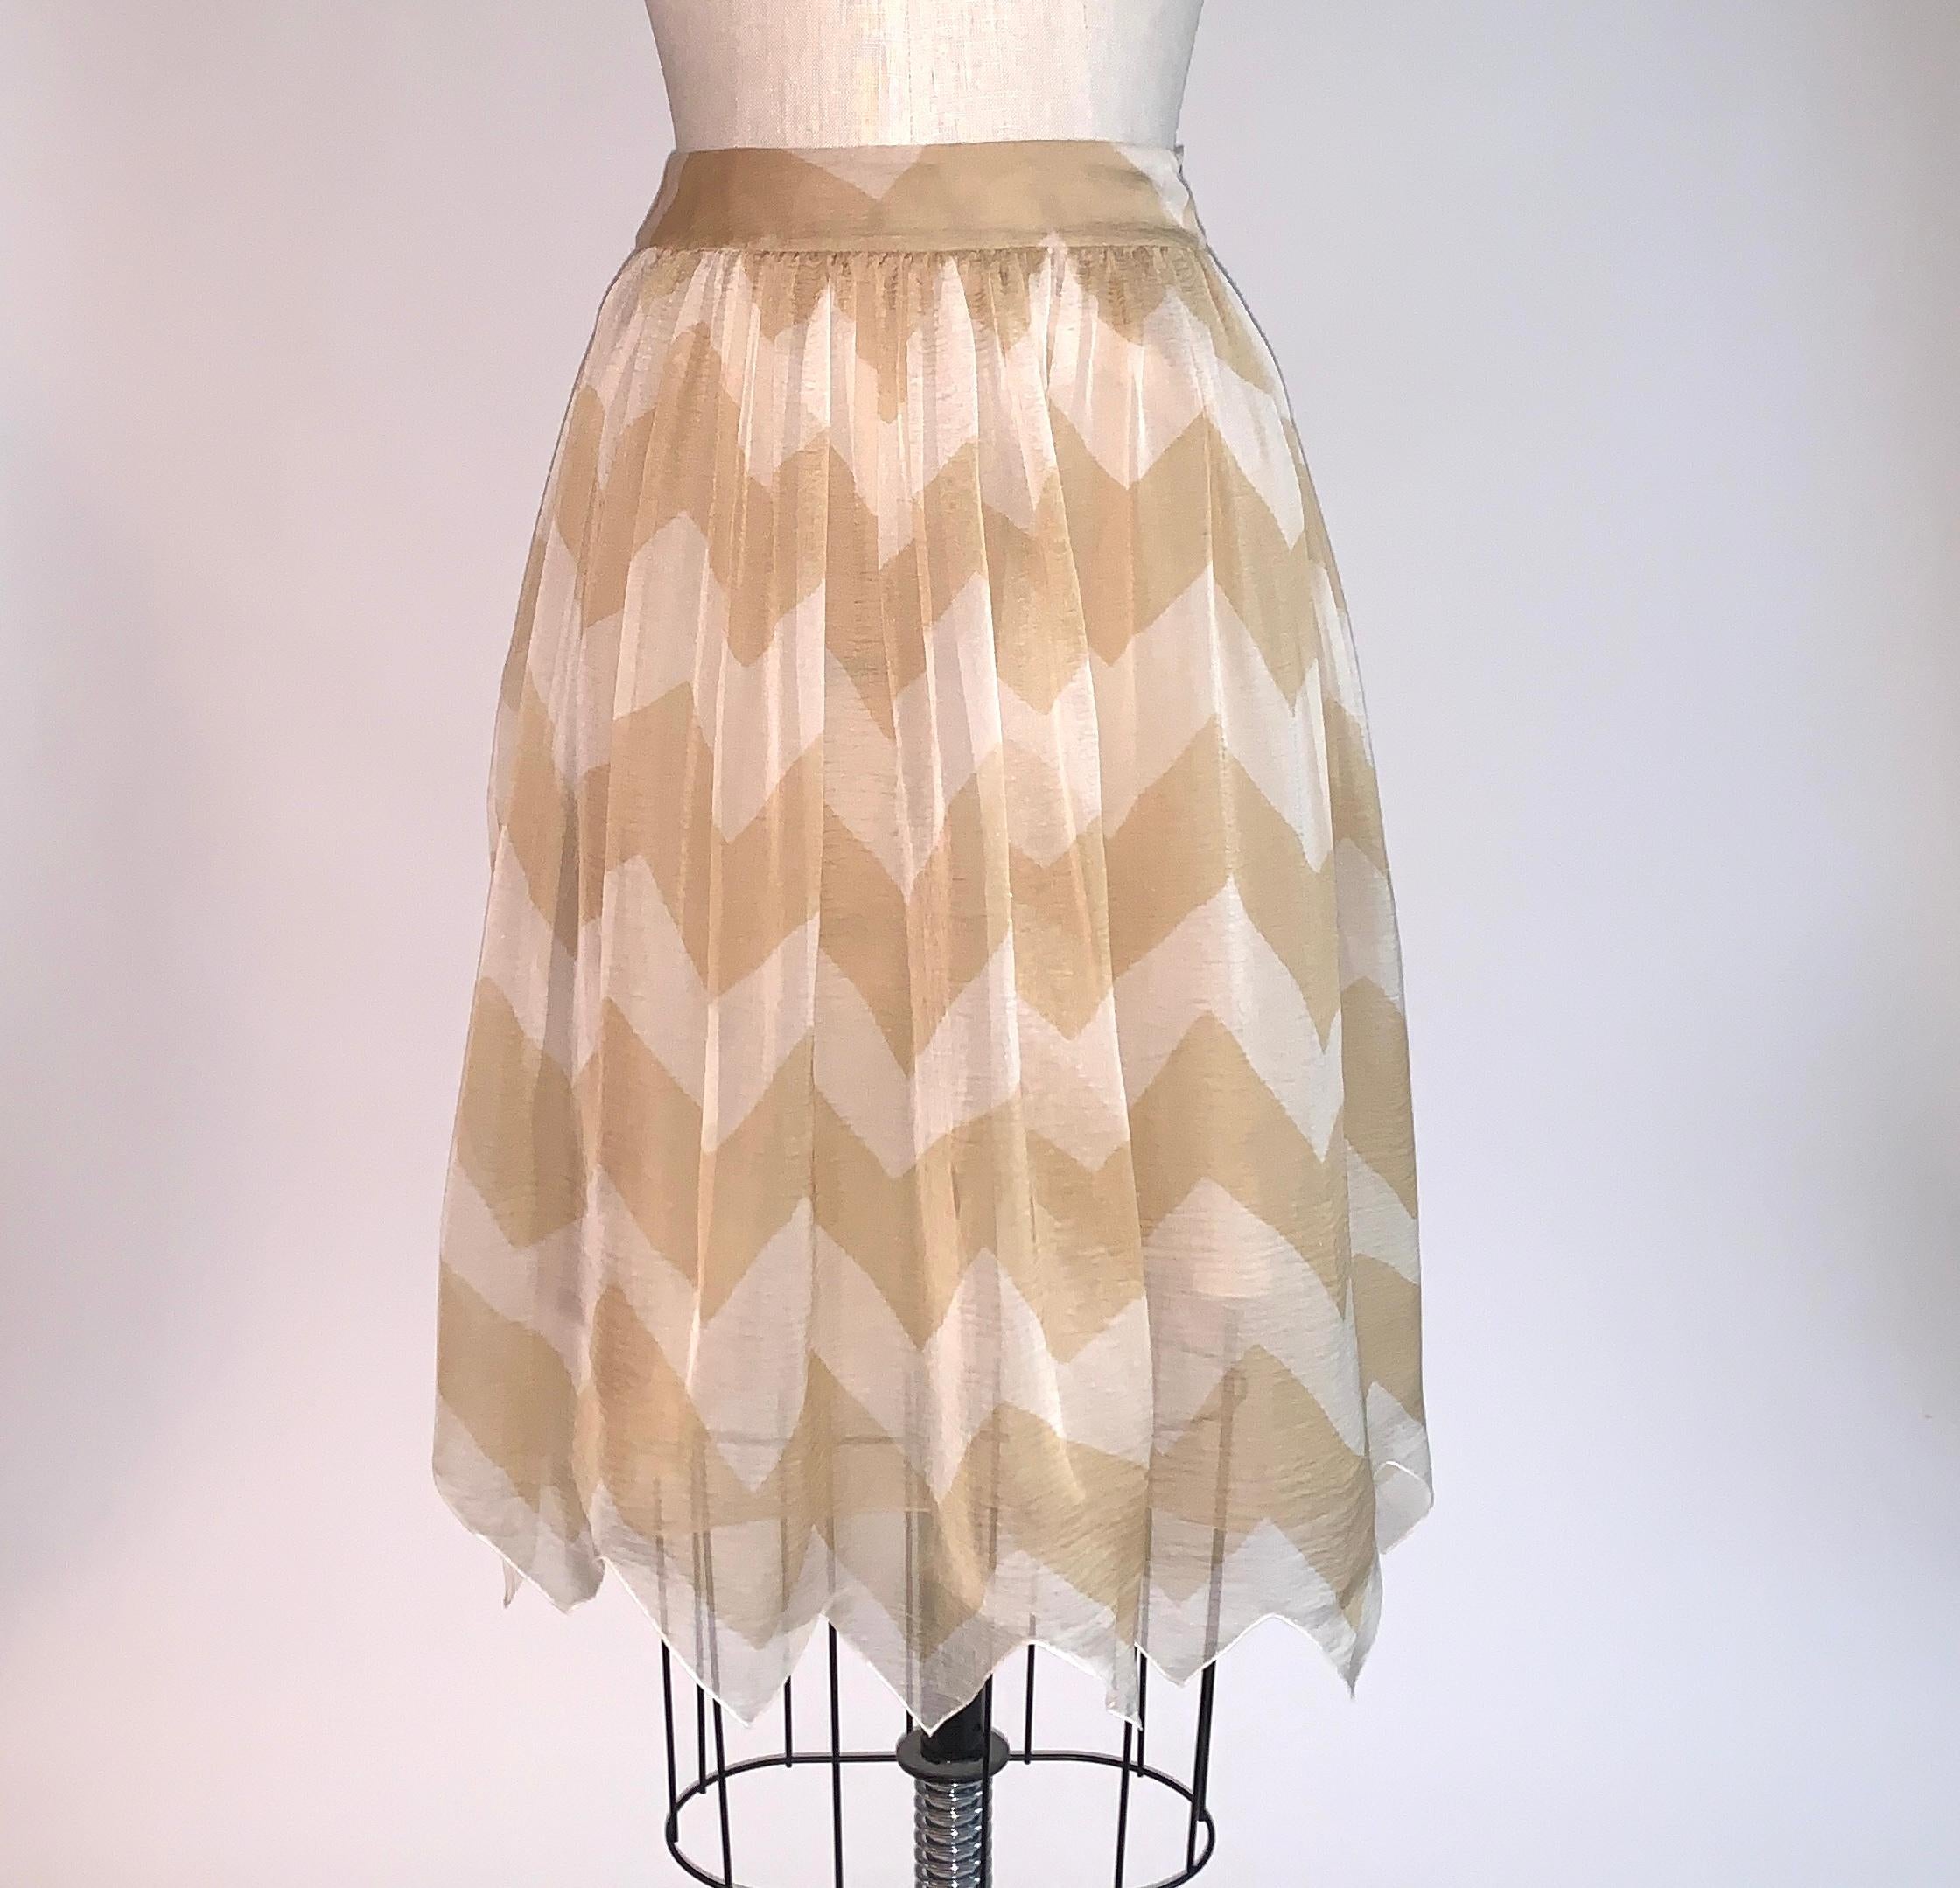 Chanel tan and white chiffon skirt in a chevron zigzag pattern with zig zag hem from the Autumn 2000 collection. Two grey shell buttons at side waist. Zipper at side interior layer.

100% silk.
Fully lined in 100% silk.

Made in France.

Size FR 34,